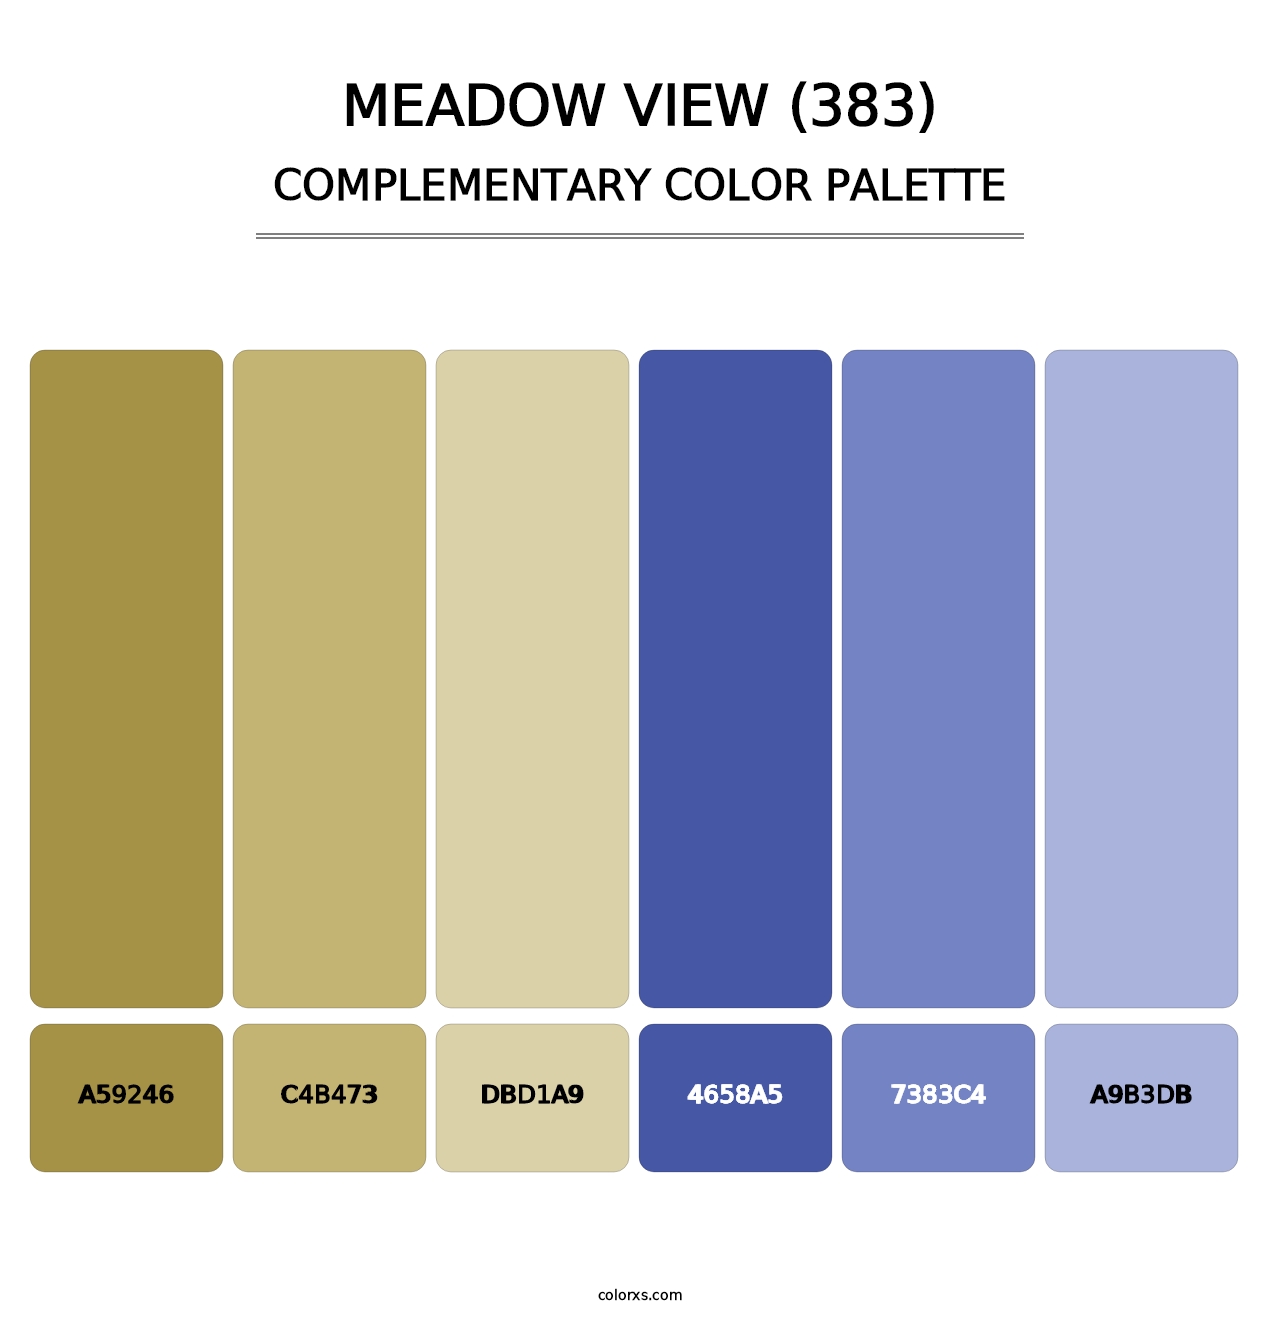 Meadow View (383) - Complementary Color Palette